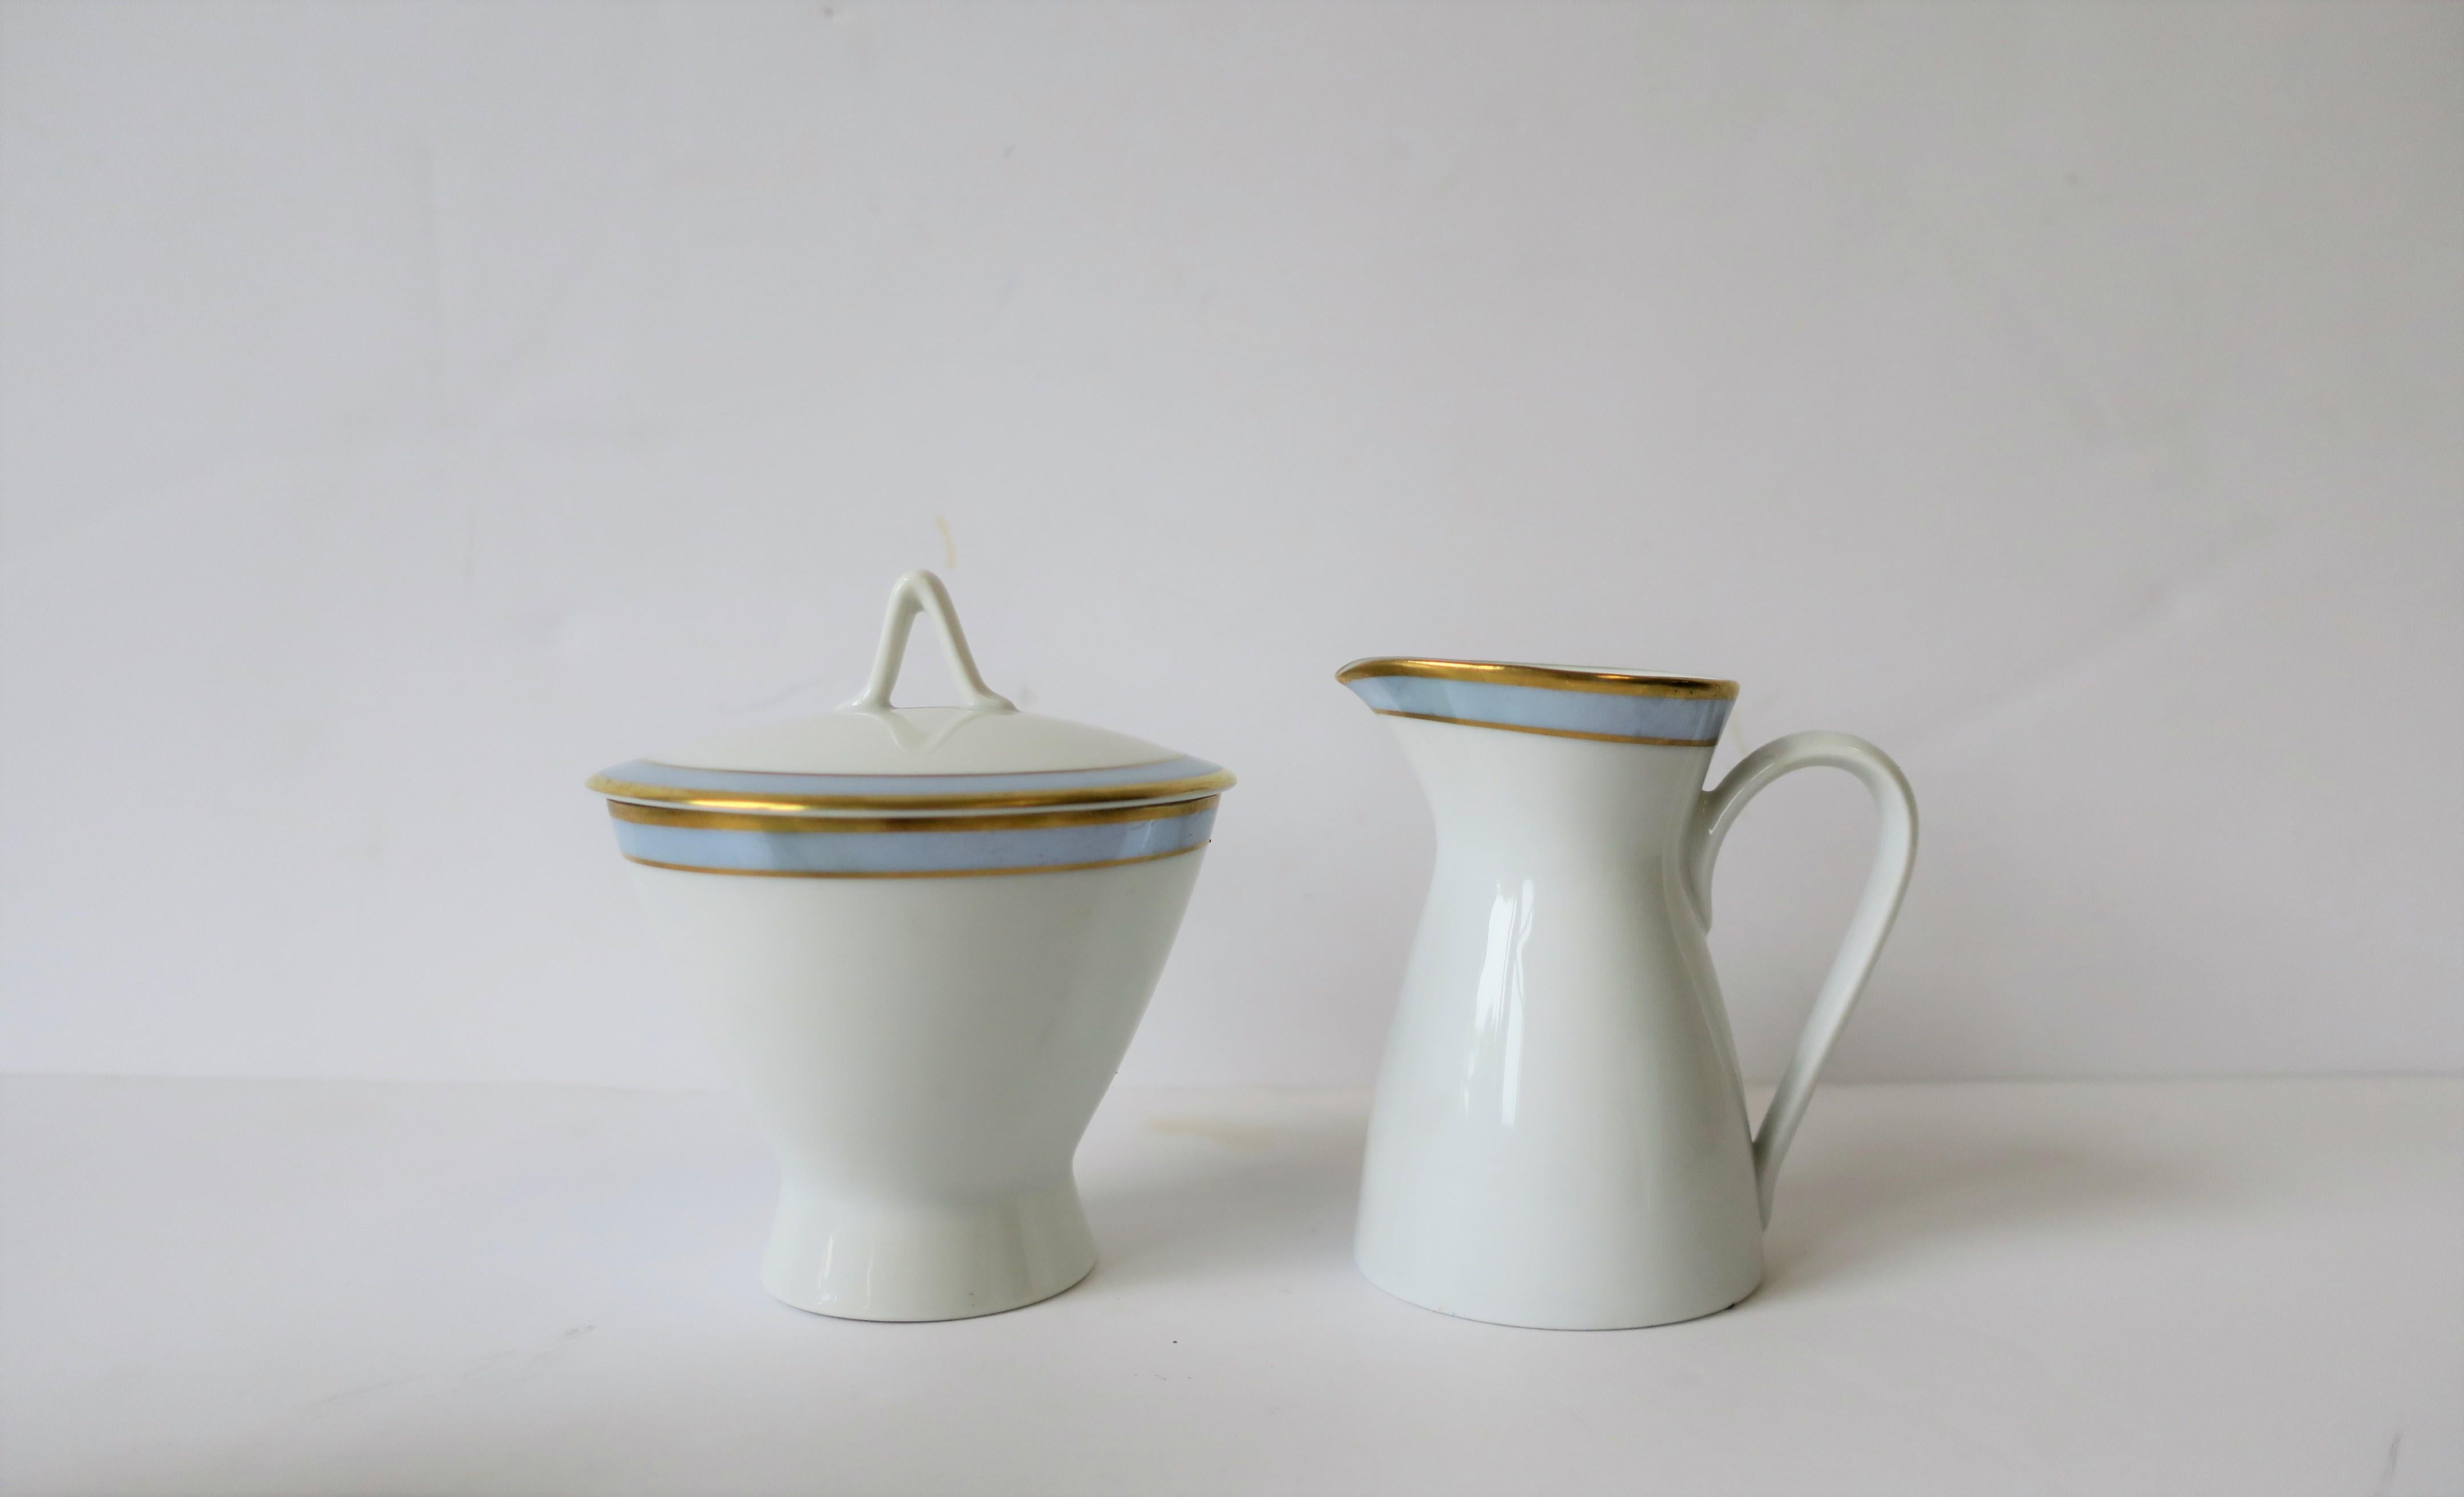 Midcentury Modern German Blue & White Porcelain Coffee or Tea Set by Rosenthal   In Good Condition For Sale In New York, NY